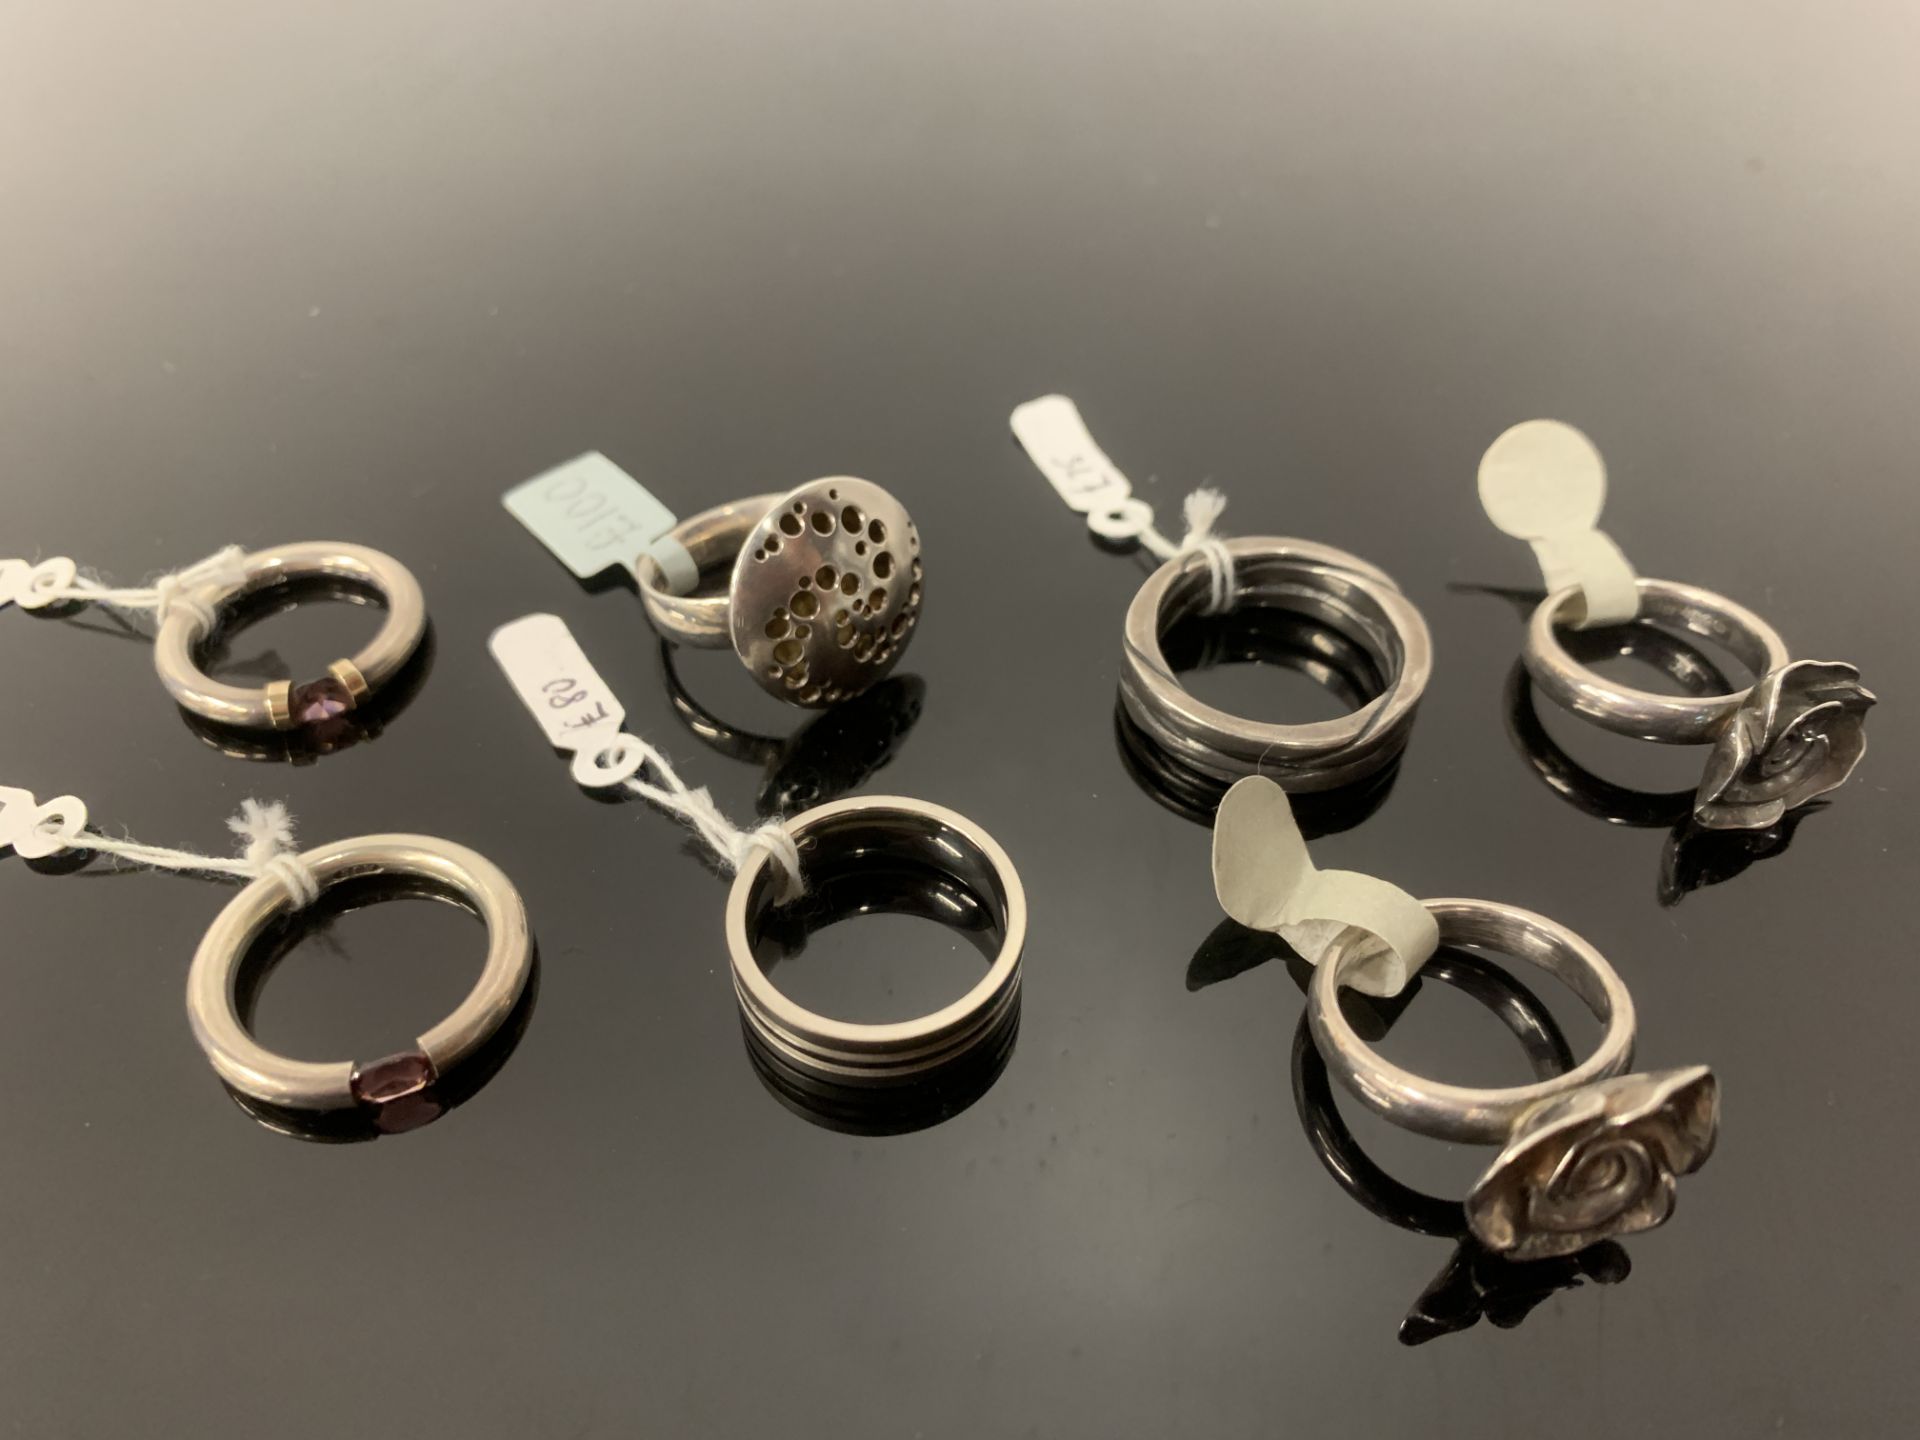 7 x assorted rings/bands - 4 x marked as being silver